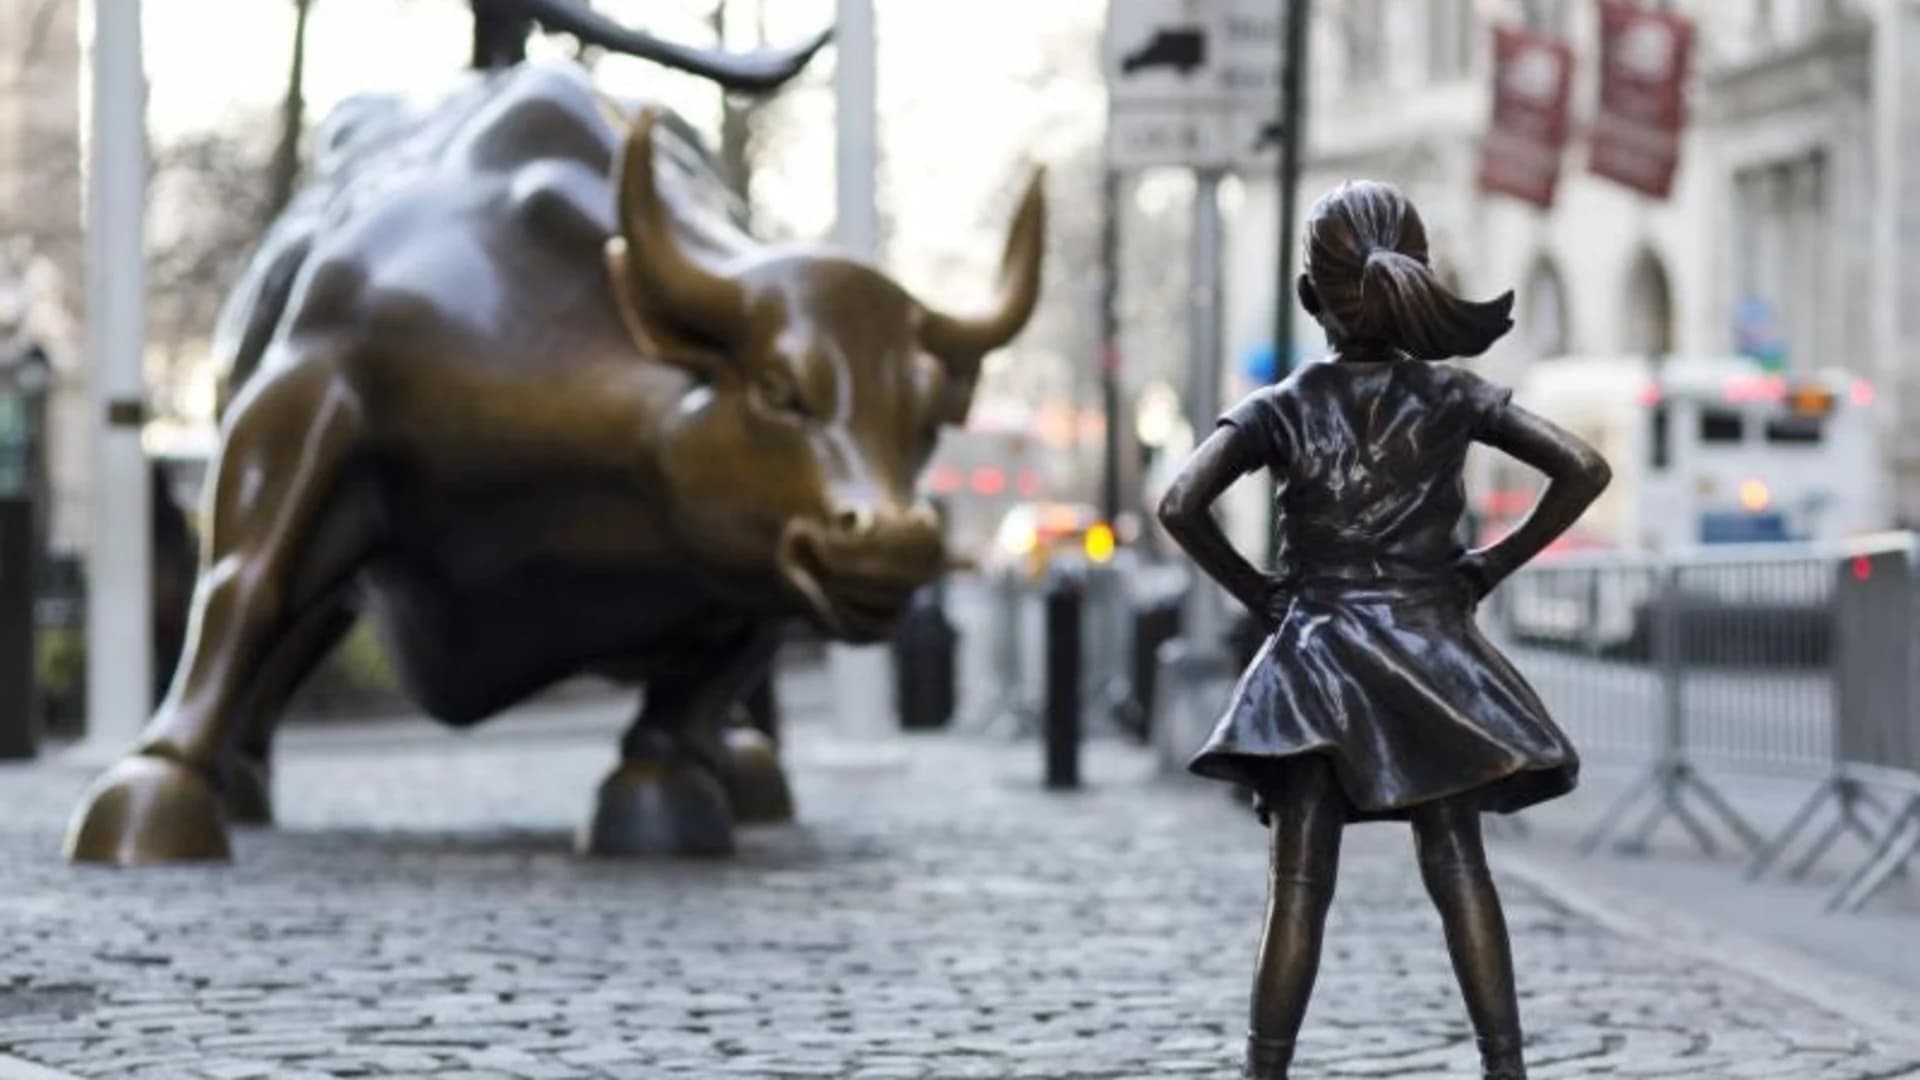 NYC Mayor: 'Fearless Girl' statue can stay through Feb. 2018